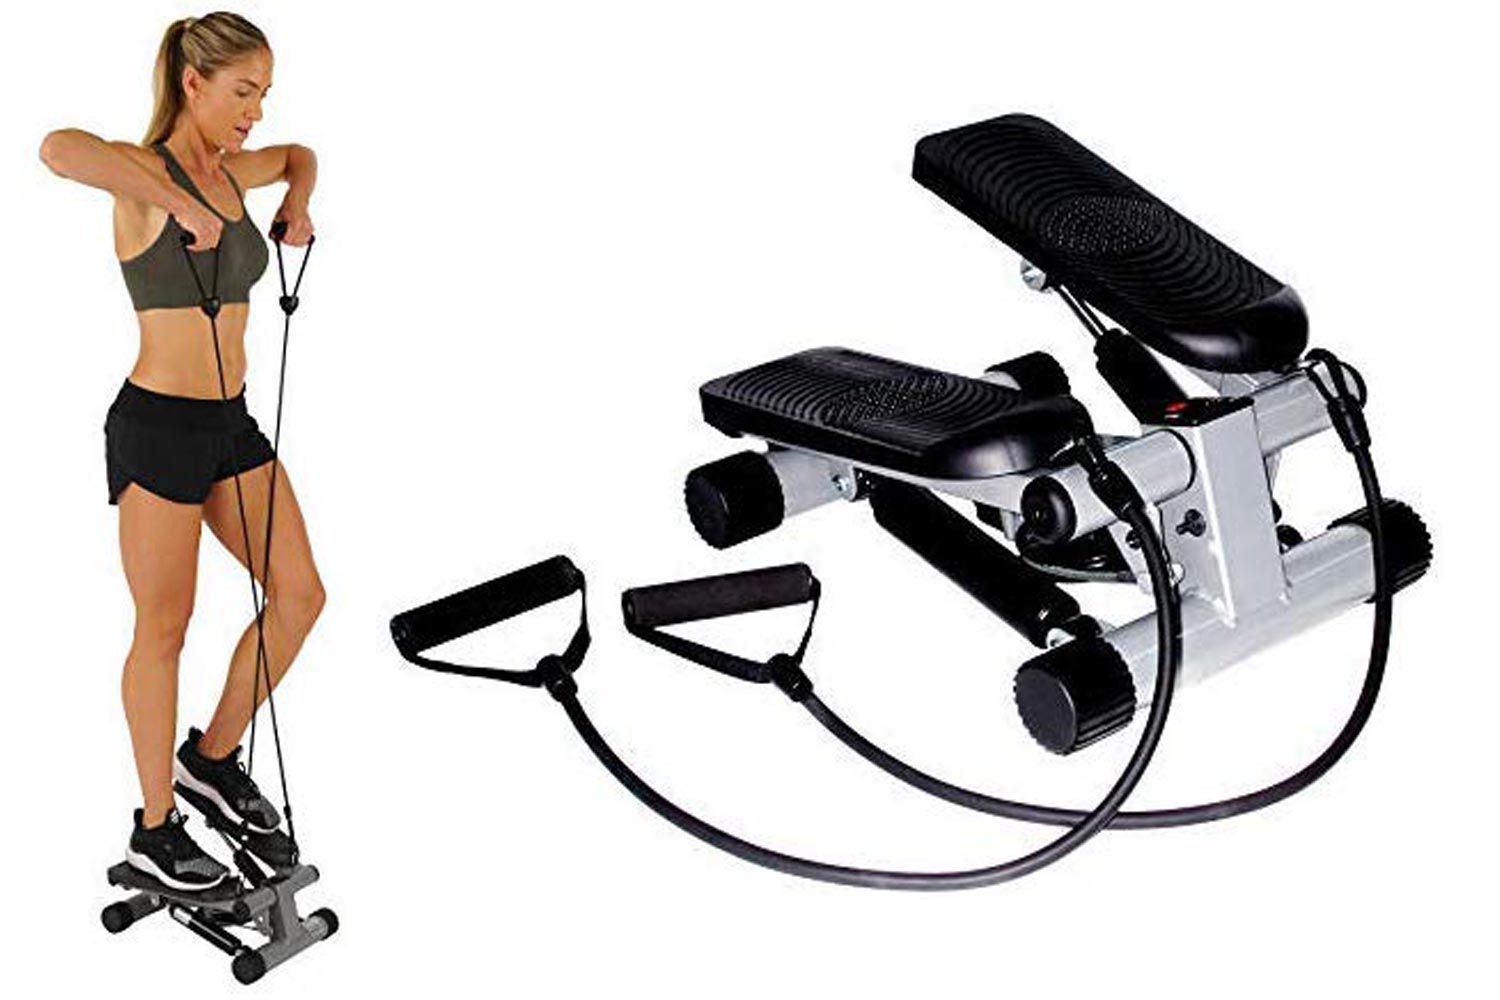 36.5 * 22 * 46cm 150 kg Fitness Stepper with Workout Bands LED Display 